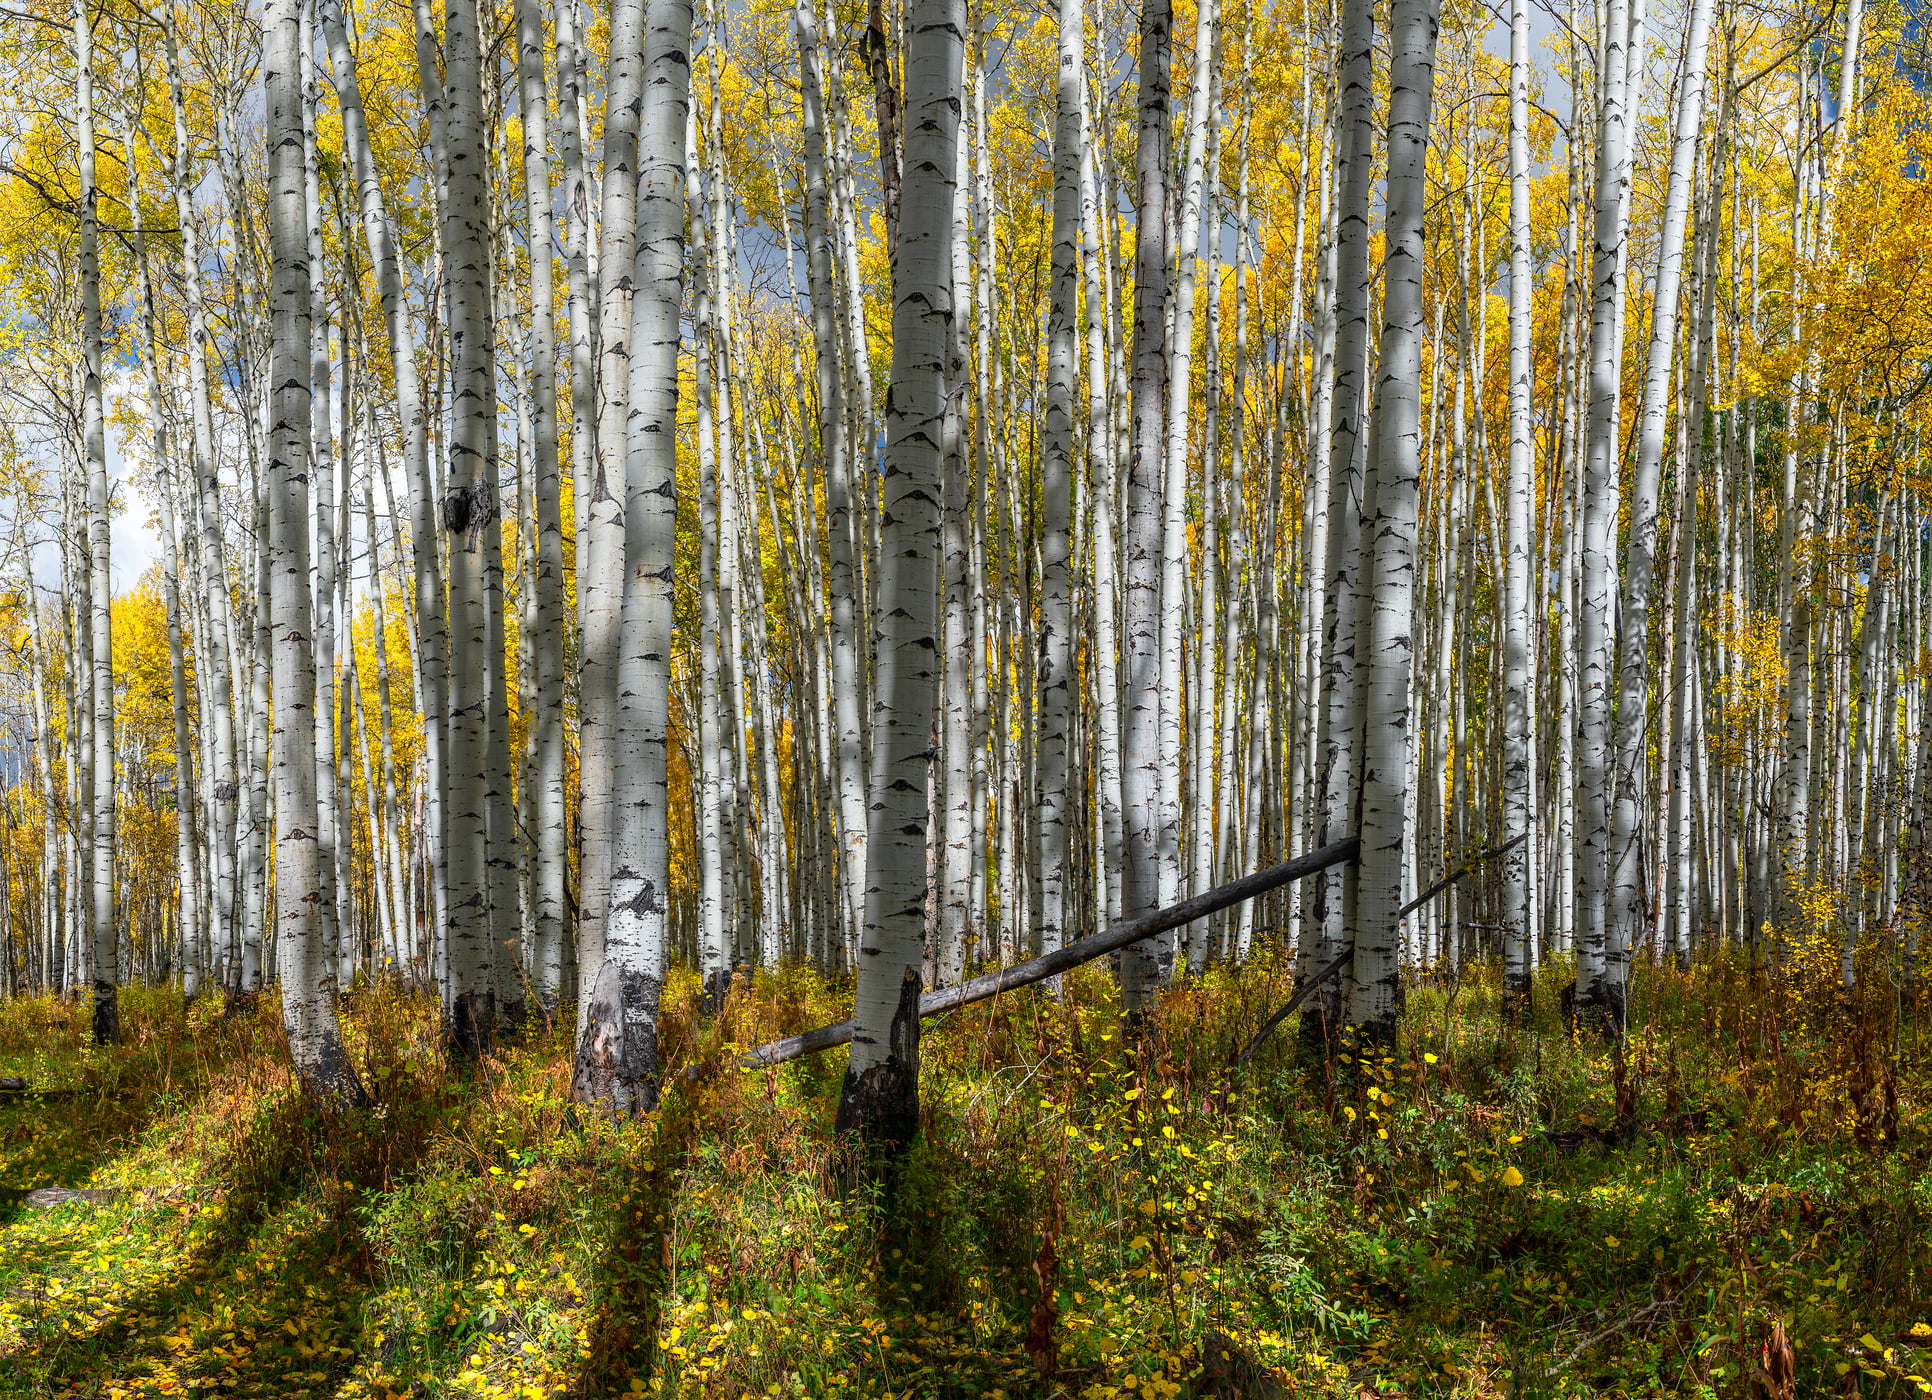 605 megapixels! A very high resolution, large-format VAST photo print of an aspen thicket; nature photograph created by Phillip Noll in Mancos, Colorado